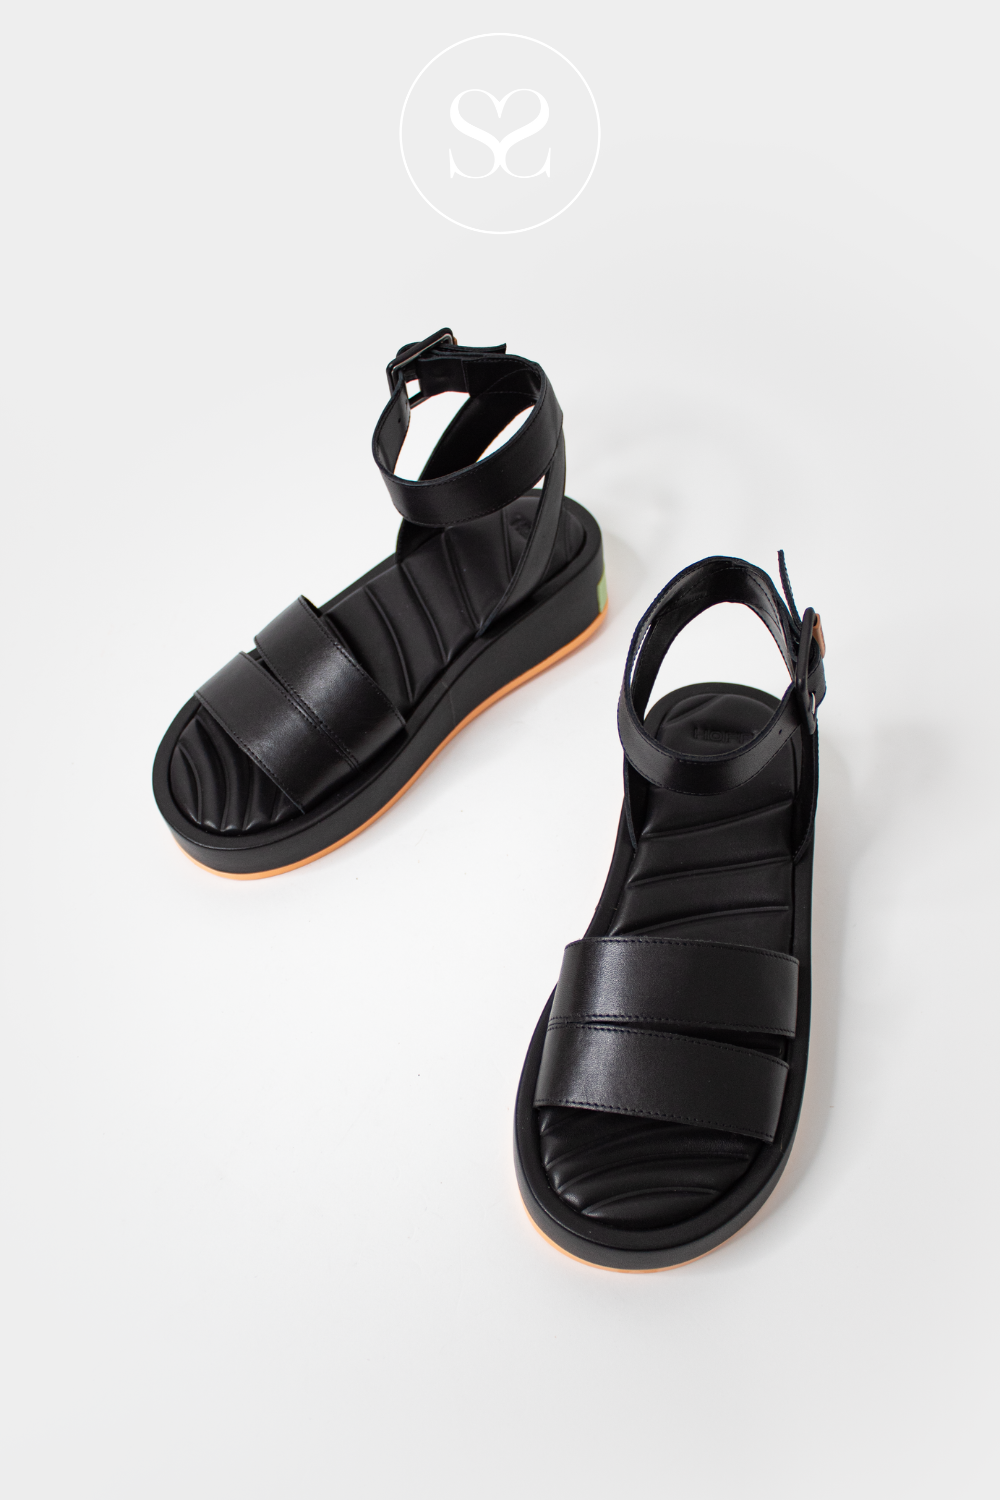 BLACK WEDGE SANDALS FROM HOFF FOR WOMEN